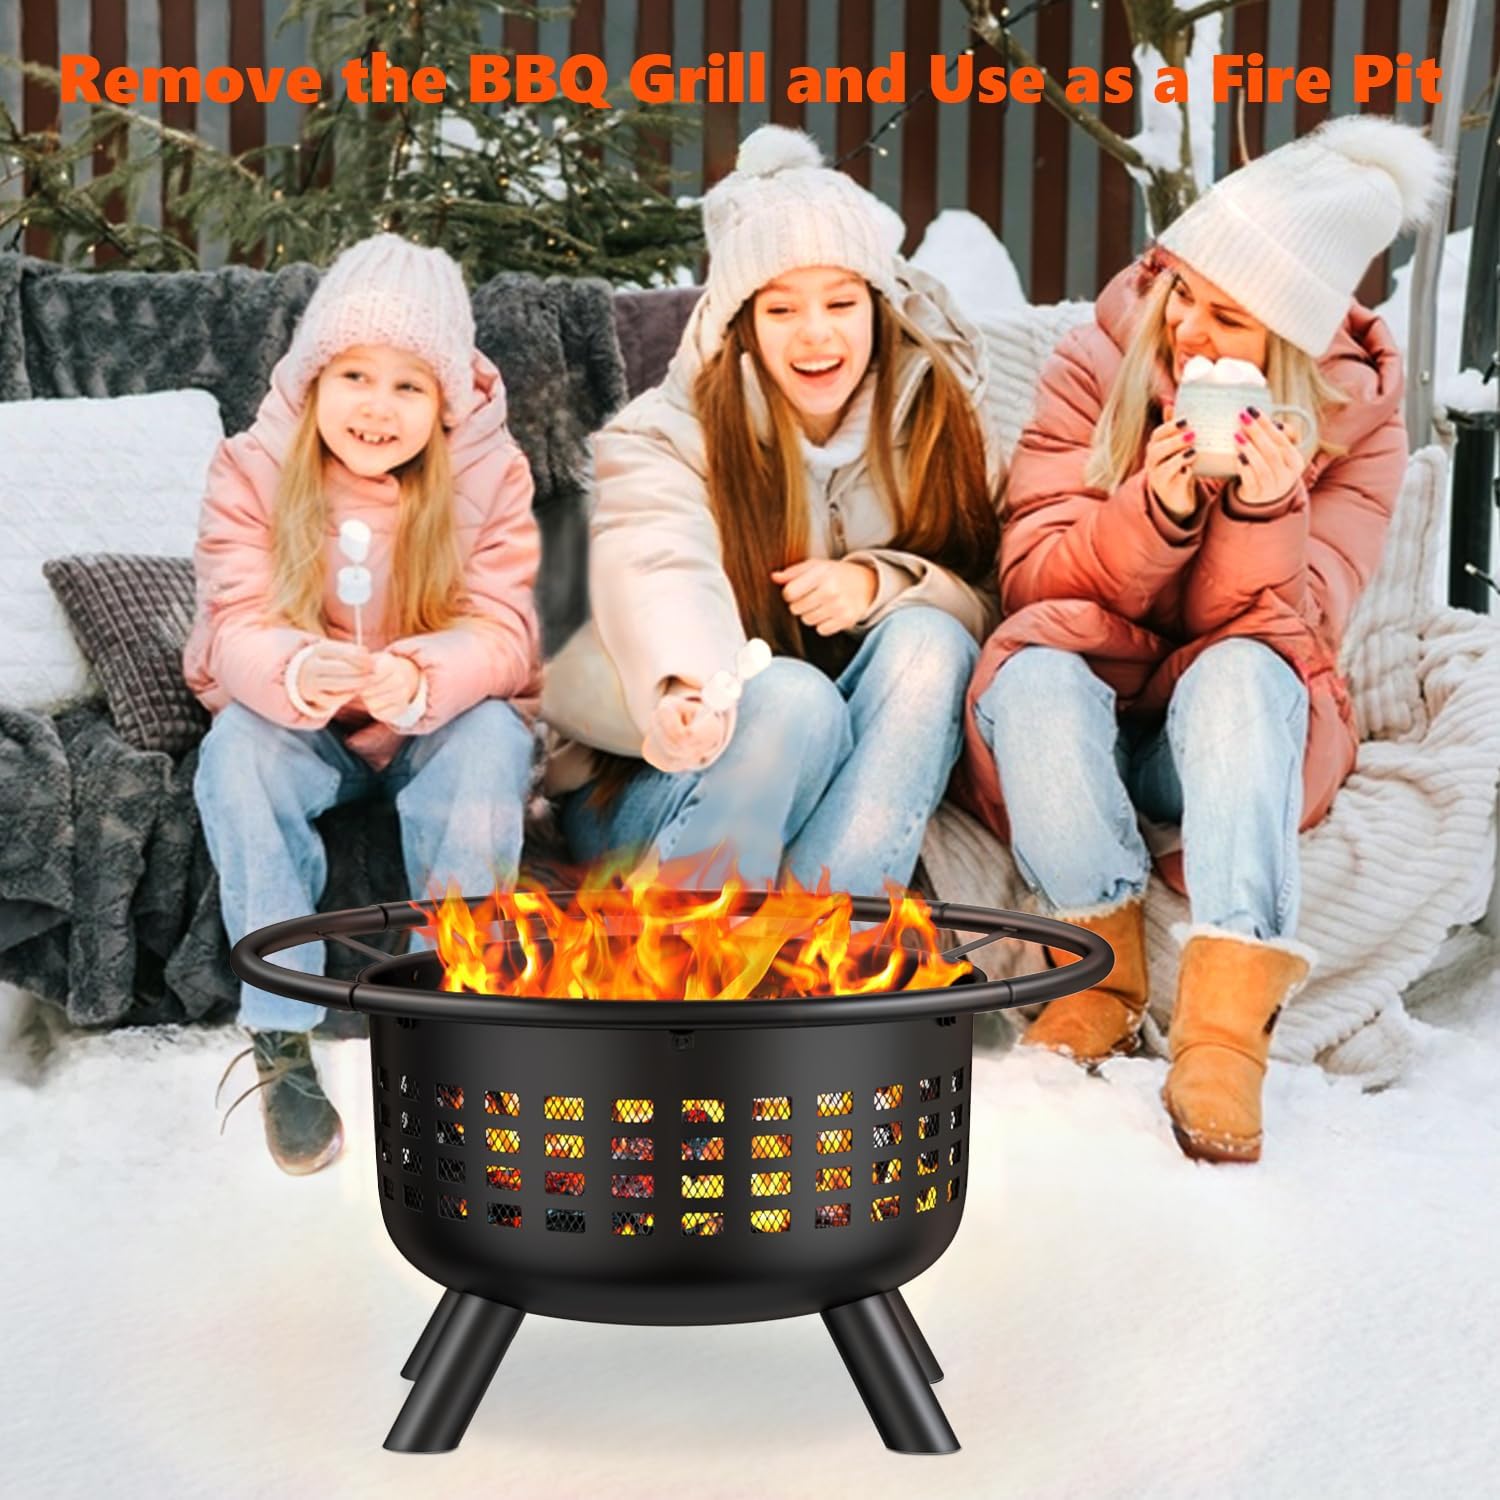 31 Inch Fire Pit with 2 Grills, Outdoor Wood Burning Firepit for outside Large Steel Firepit Bowl with Steel BBQ Grill Cooking Grates, Cover for Garden Patio Backyard Picnic Camping